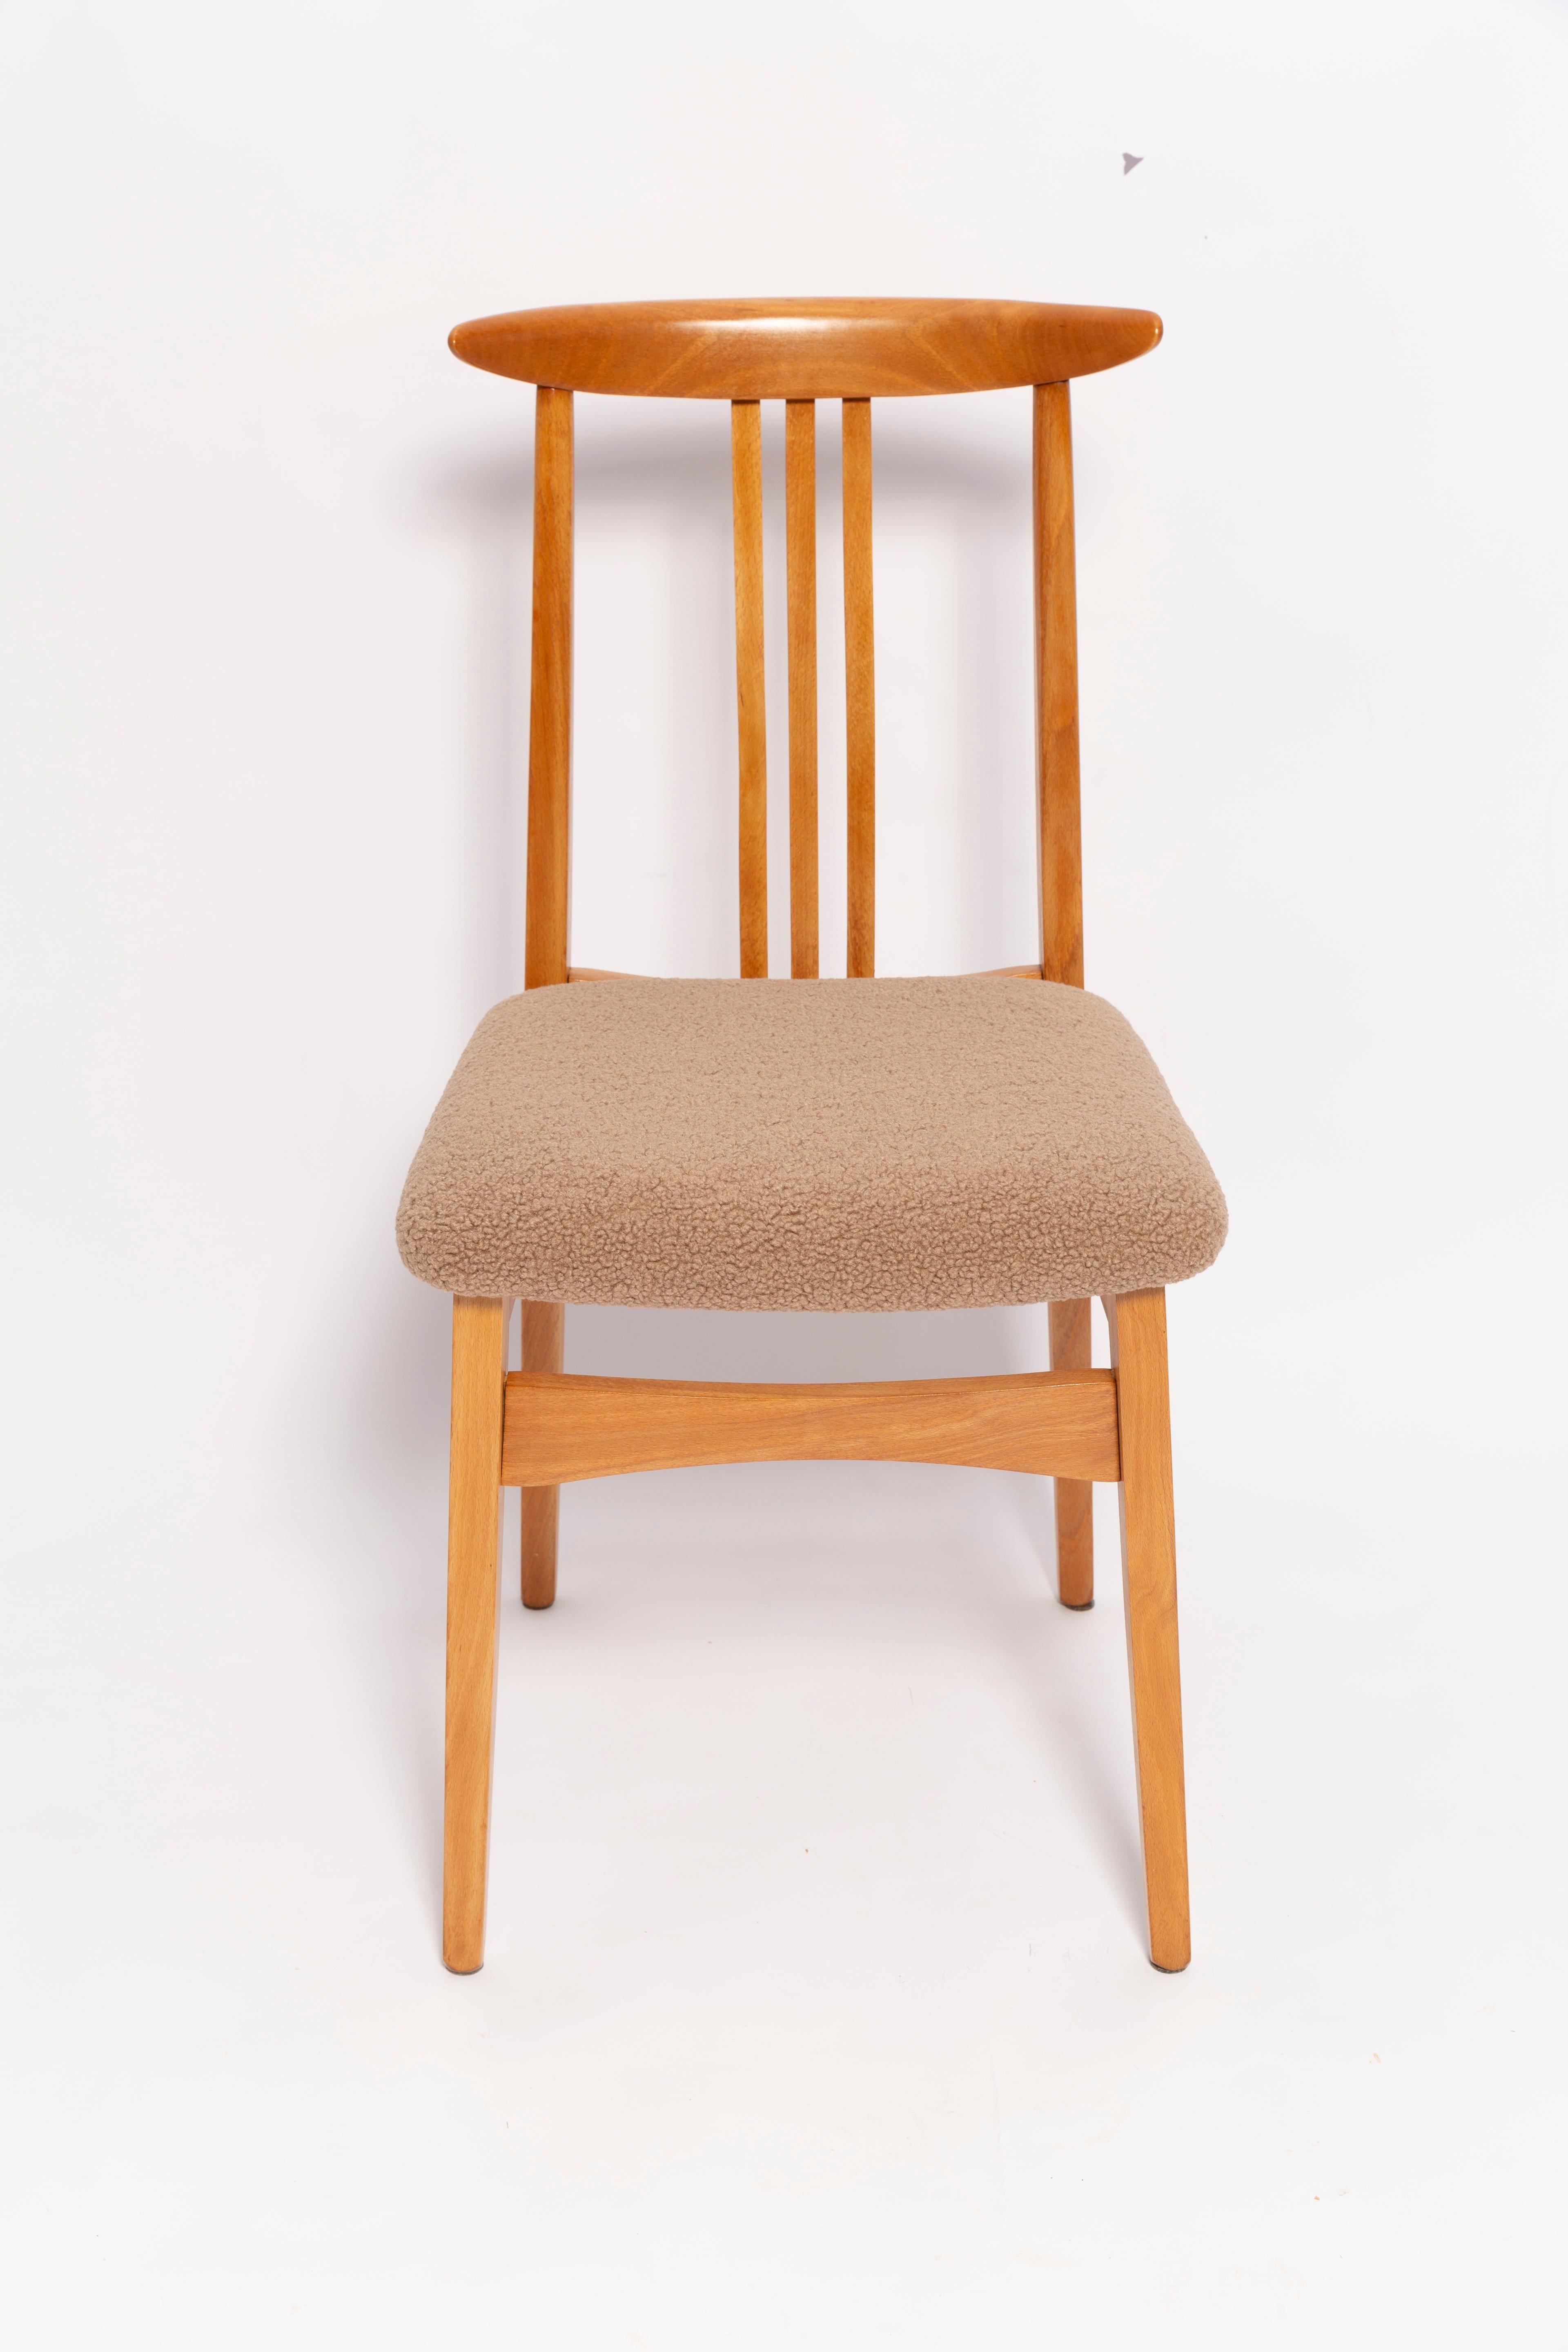 Hand-Crafted Mid-Century Latte Boucle Chair, Light Wood, M. Zielinski, Europe 1960s For Sale